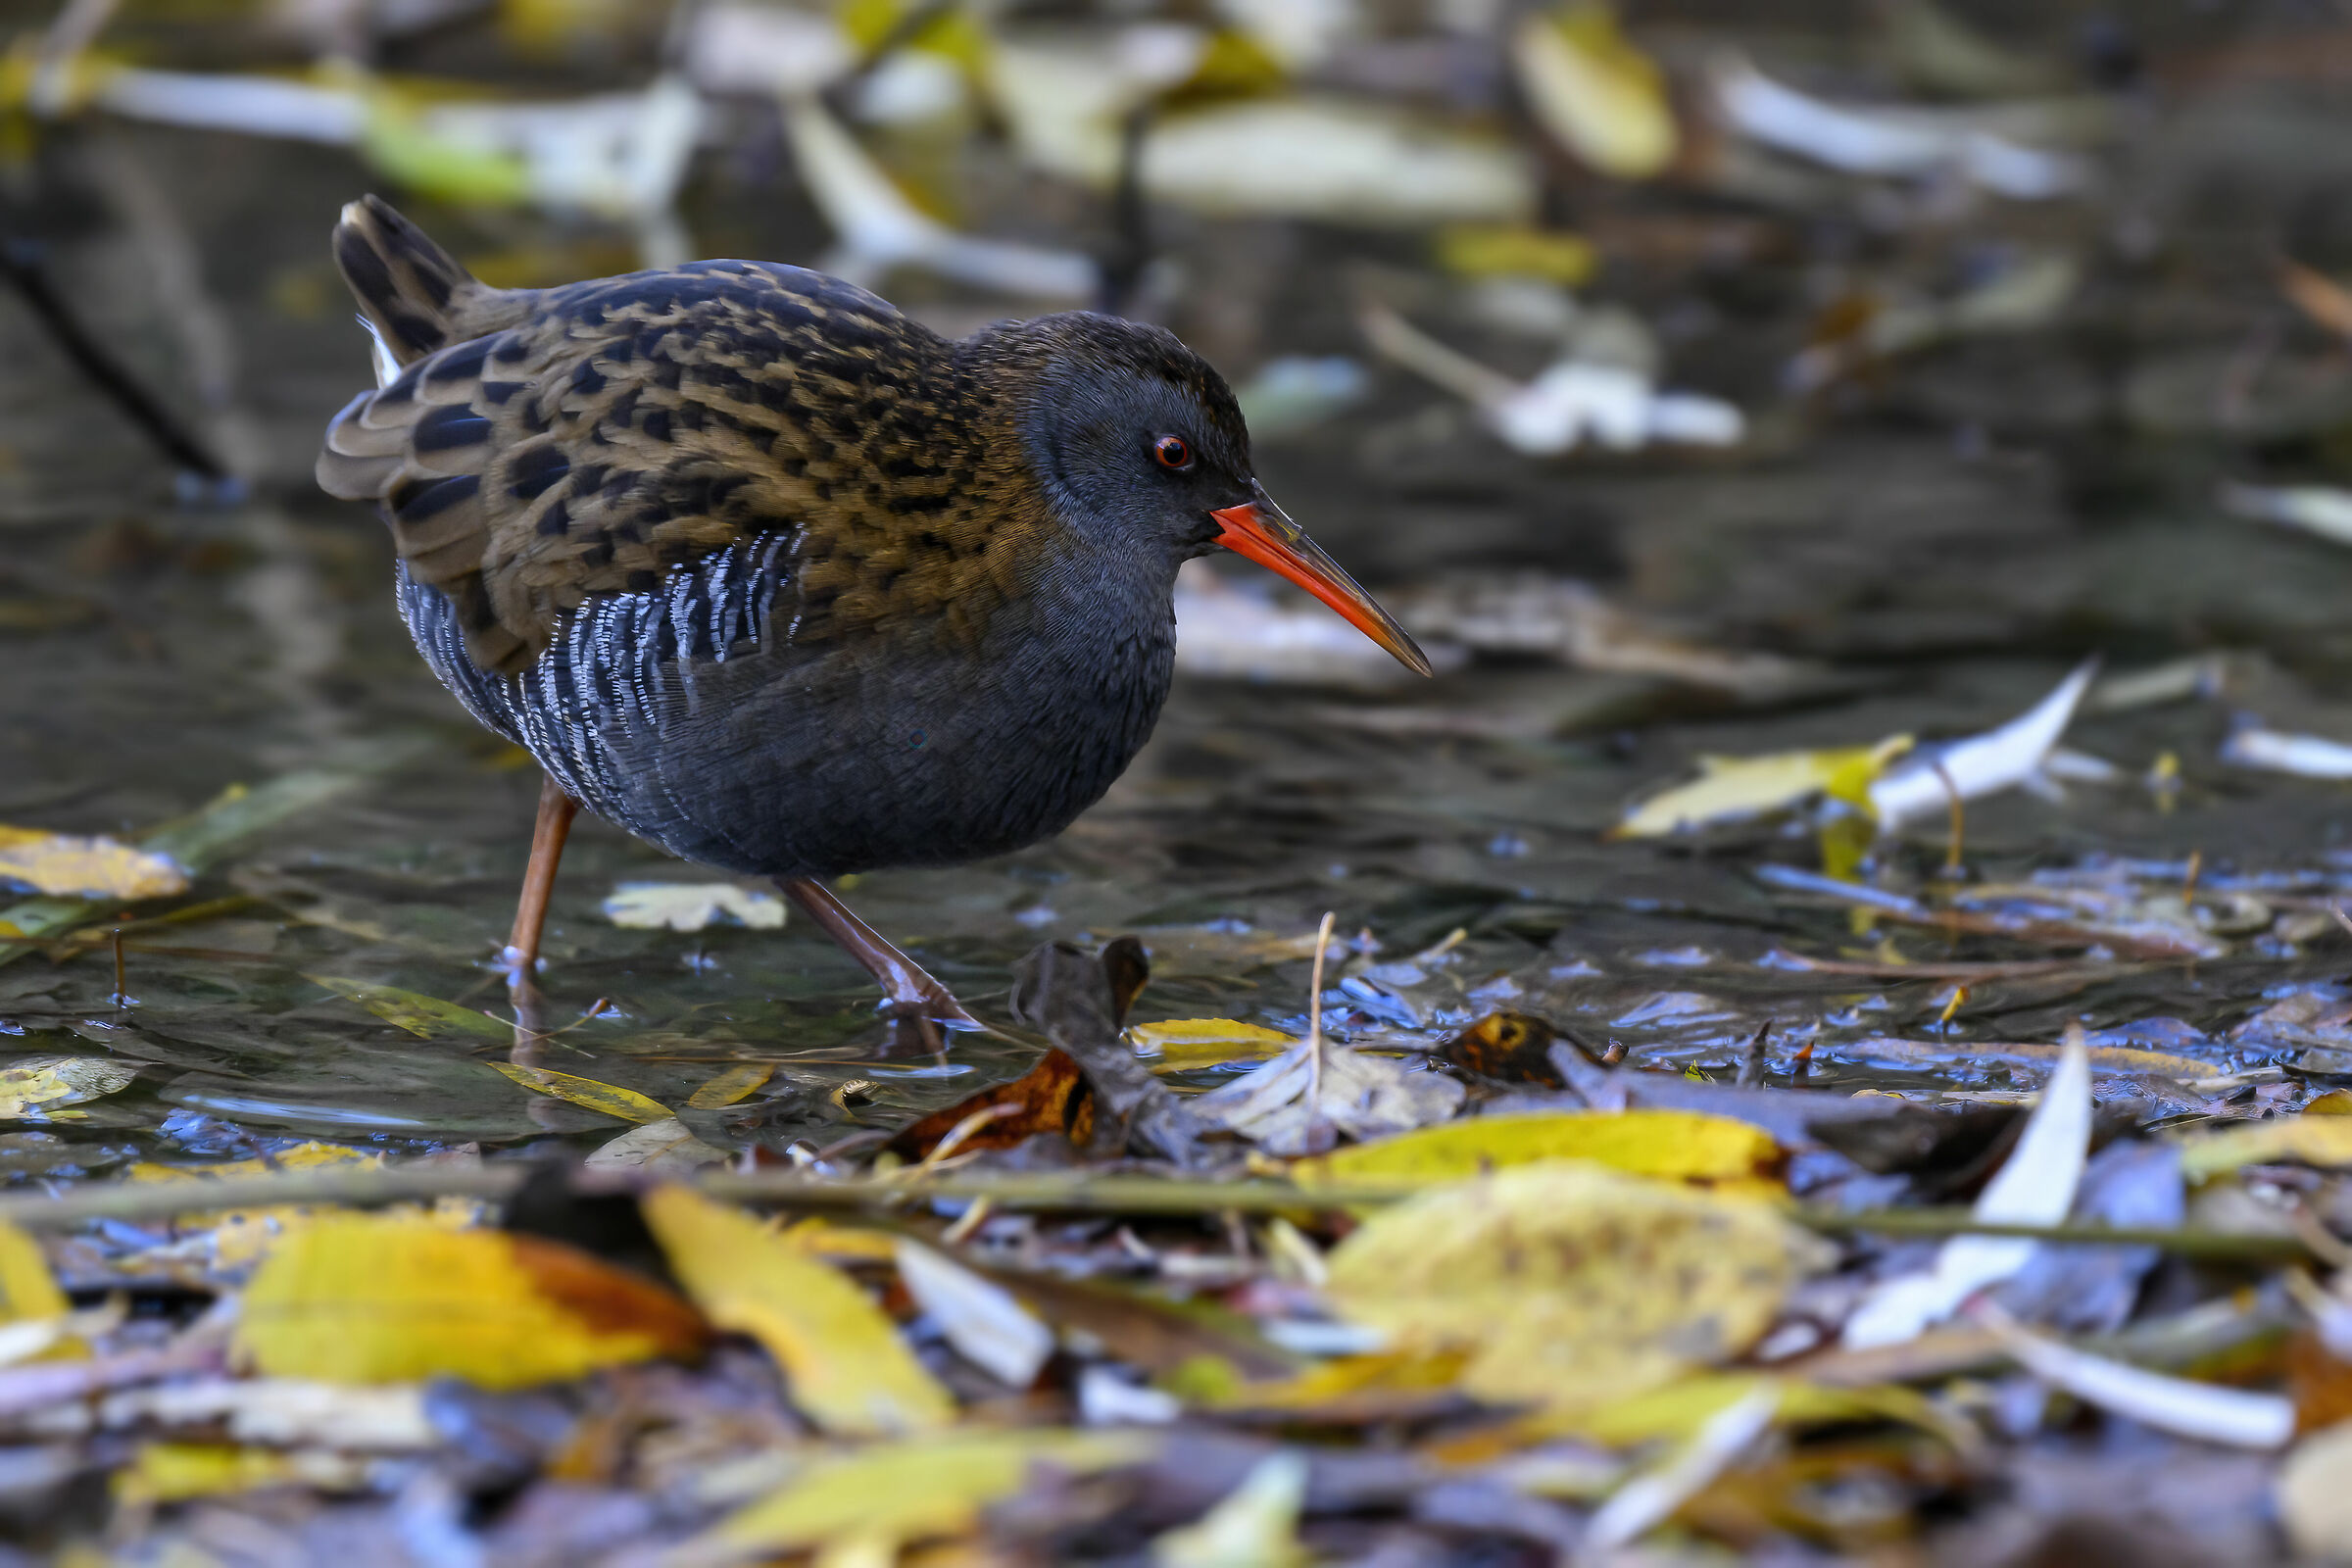 Suddenly the water rail...